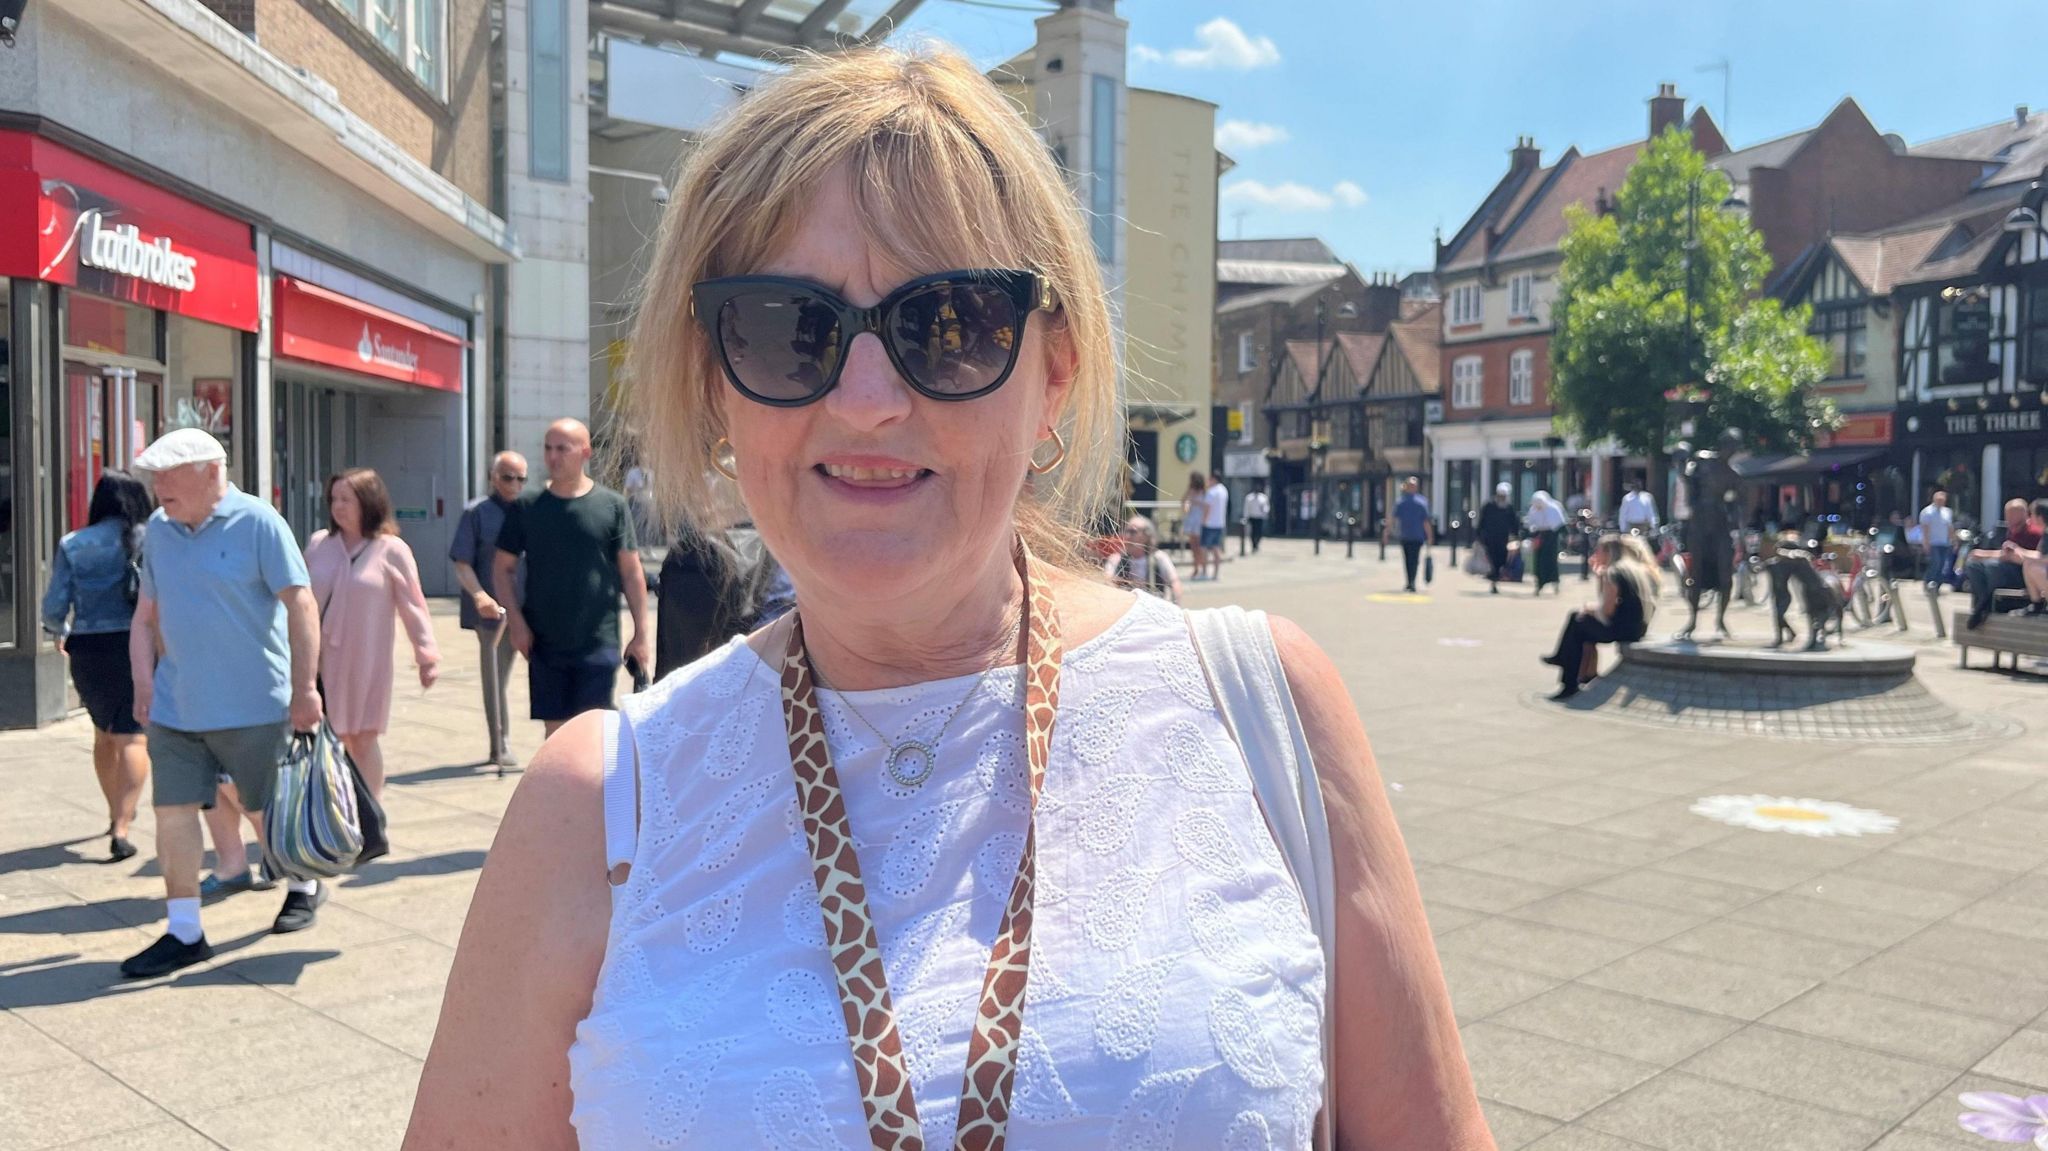 Uxbridge resident Kay who is wearing black sunglasses, a white sleeveless top and a leopard skin lanyard. In the background there is a Ladbrokes betting shop and Uxbridge town centre's paved area with a tree and some seating, as well as passers by walking past her.